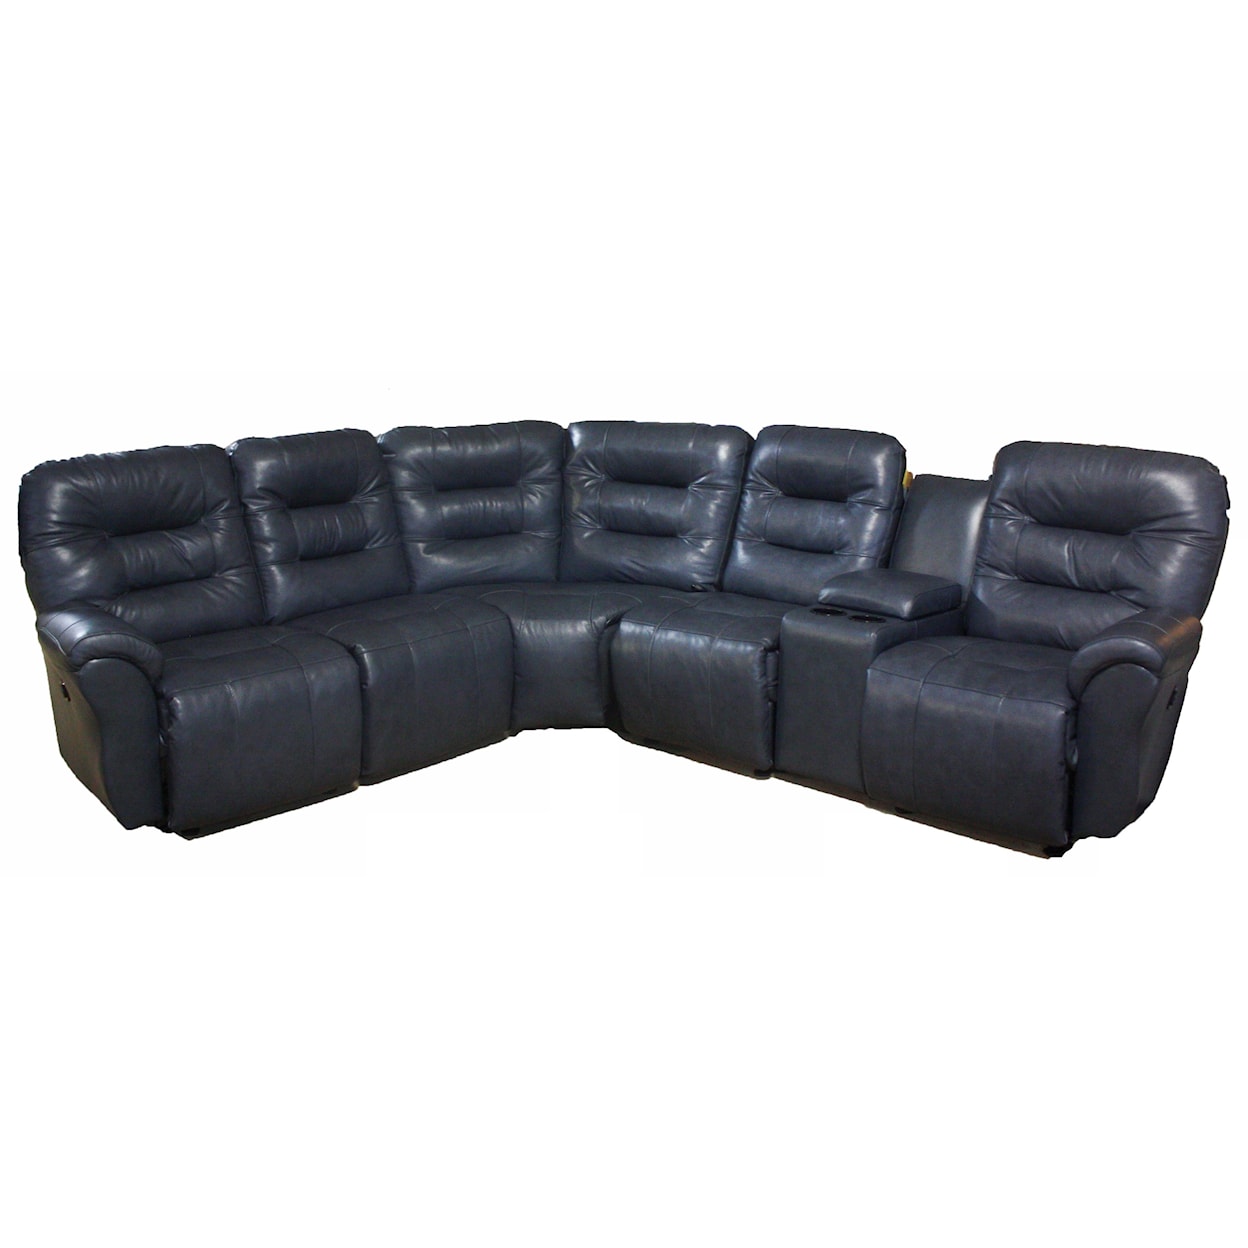 Best Home Furnishings Unity 6 PC Reclining Sectional